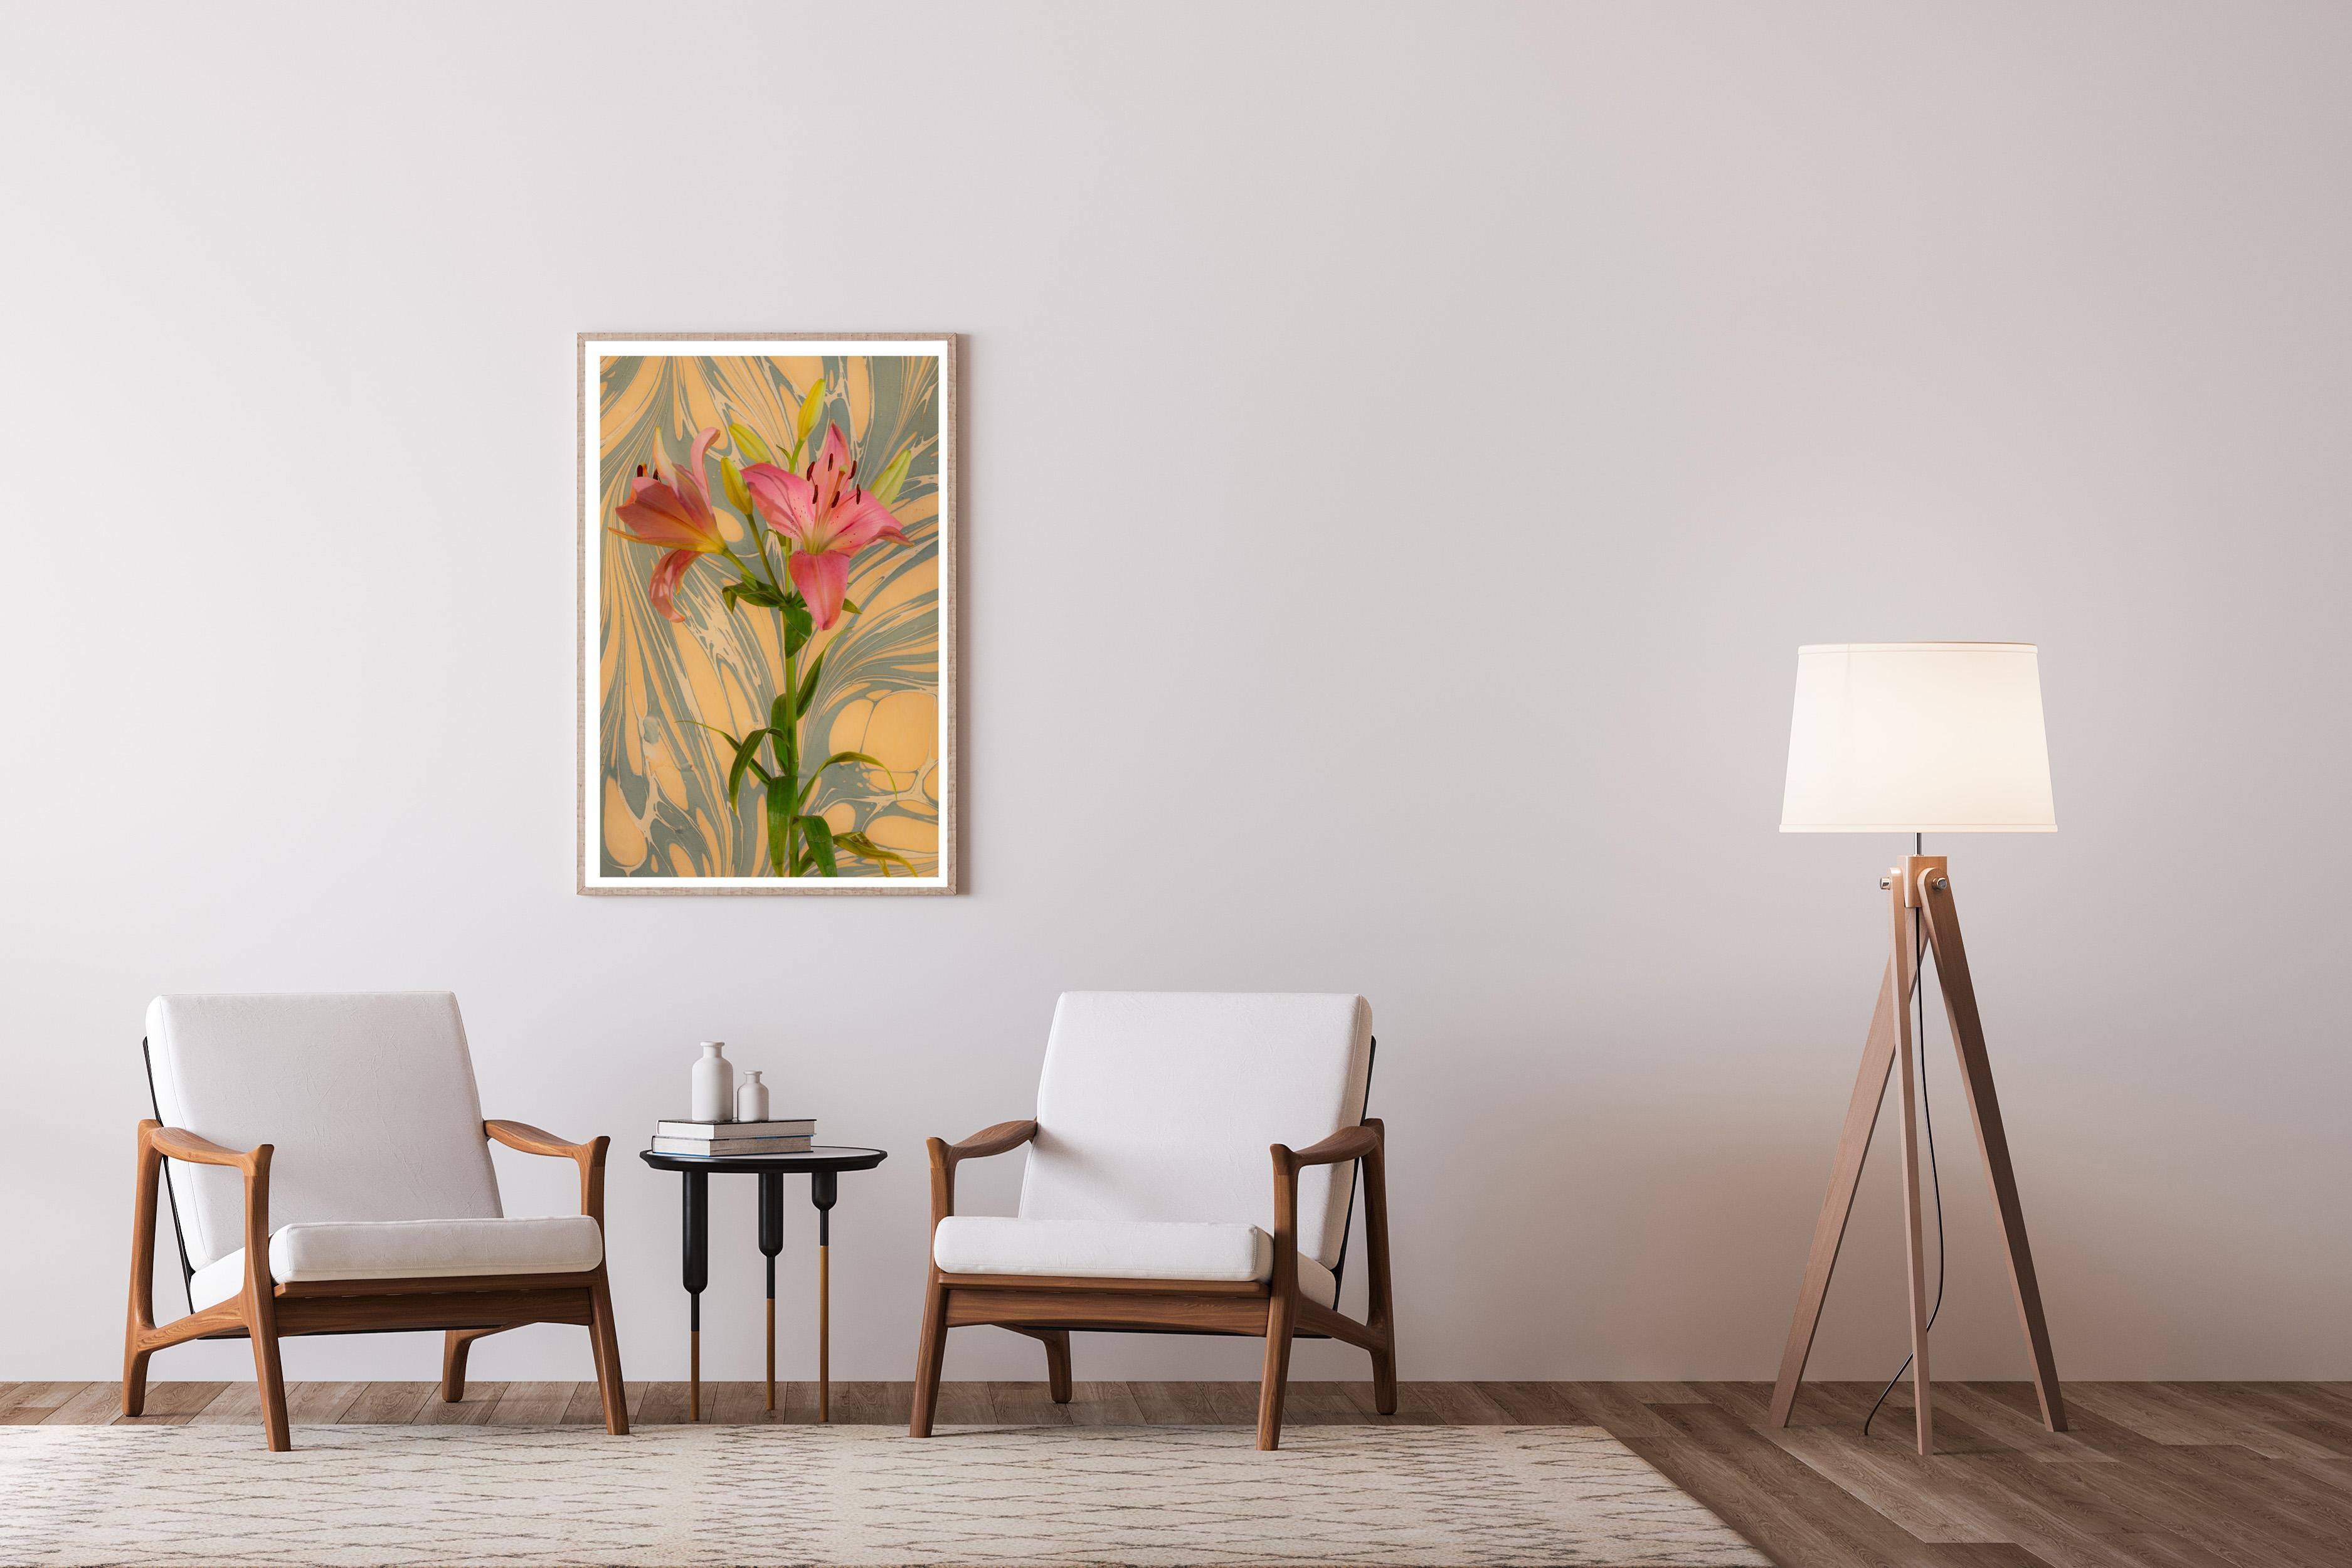 Seventies Psychedelic Flowers, Pink Lilys Bouquet, Modern Still Life, Giclée  - Brown Still-Life Print by Kind of Cyan